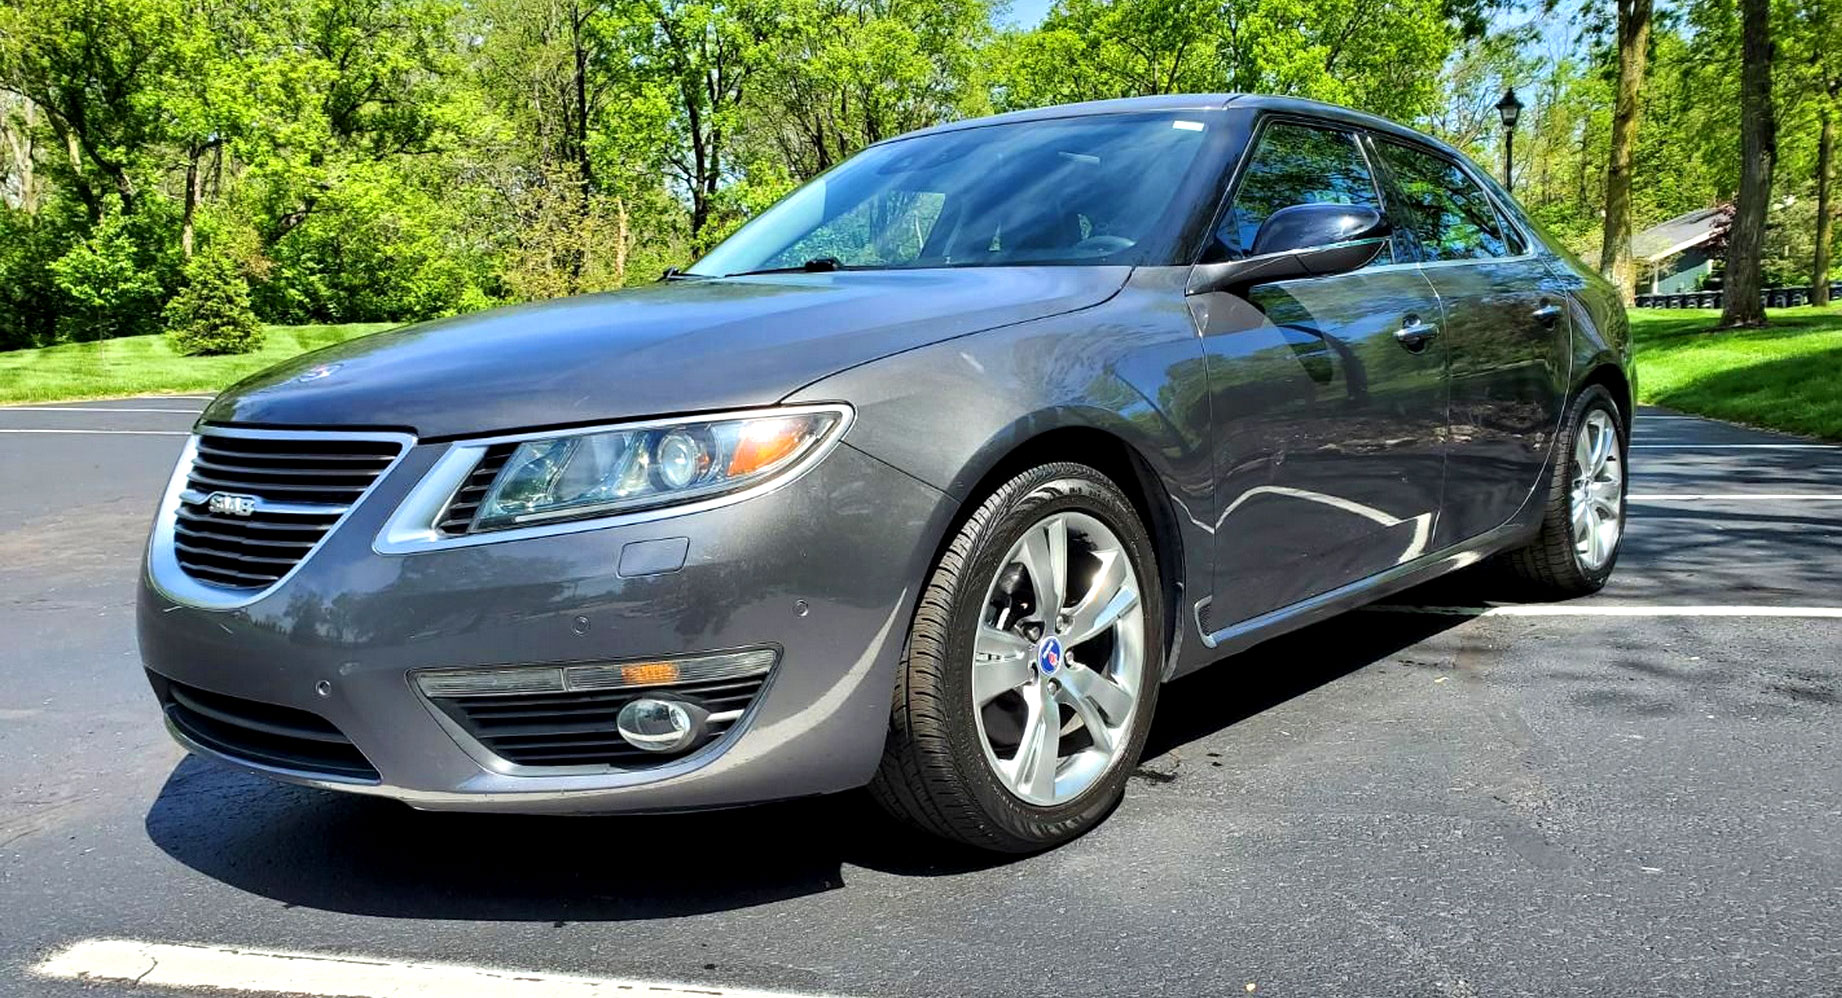 Could This Stunning Saab 9-5 Sendoff End Up Being A Steal Of A Deal? |  Carscoops